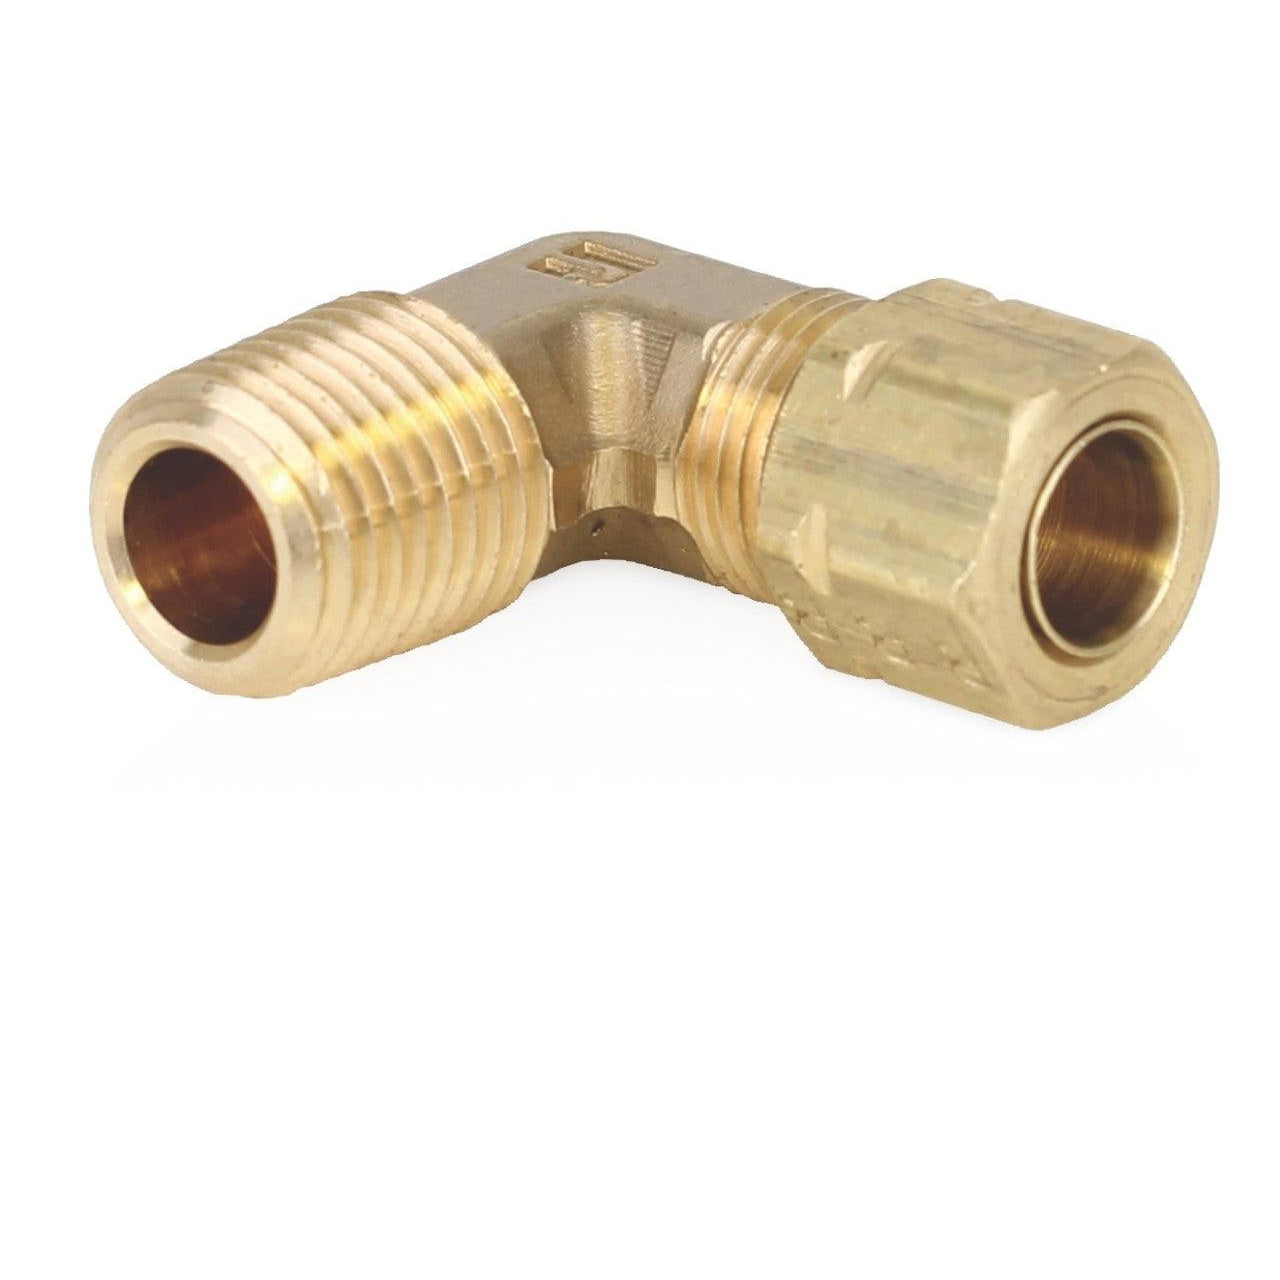 Fitting - Brass Male Tube Elbows 5/16 in. (7.94 mm) Tube x 1/4 in. (6.35 mm) NPTF